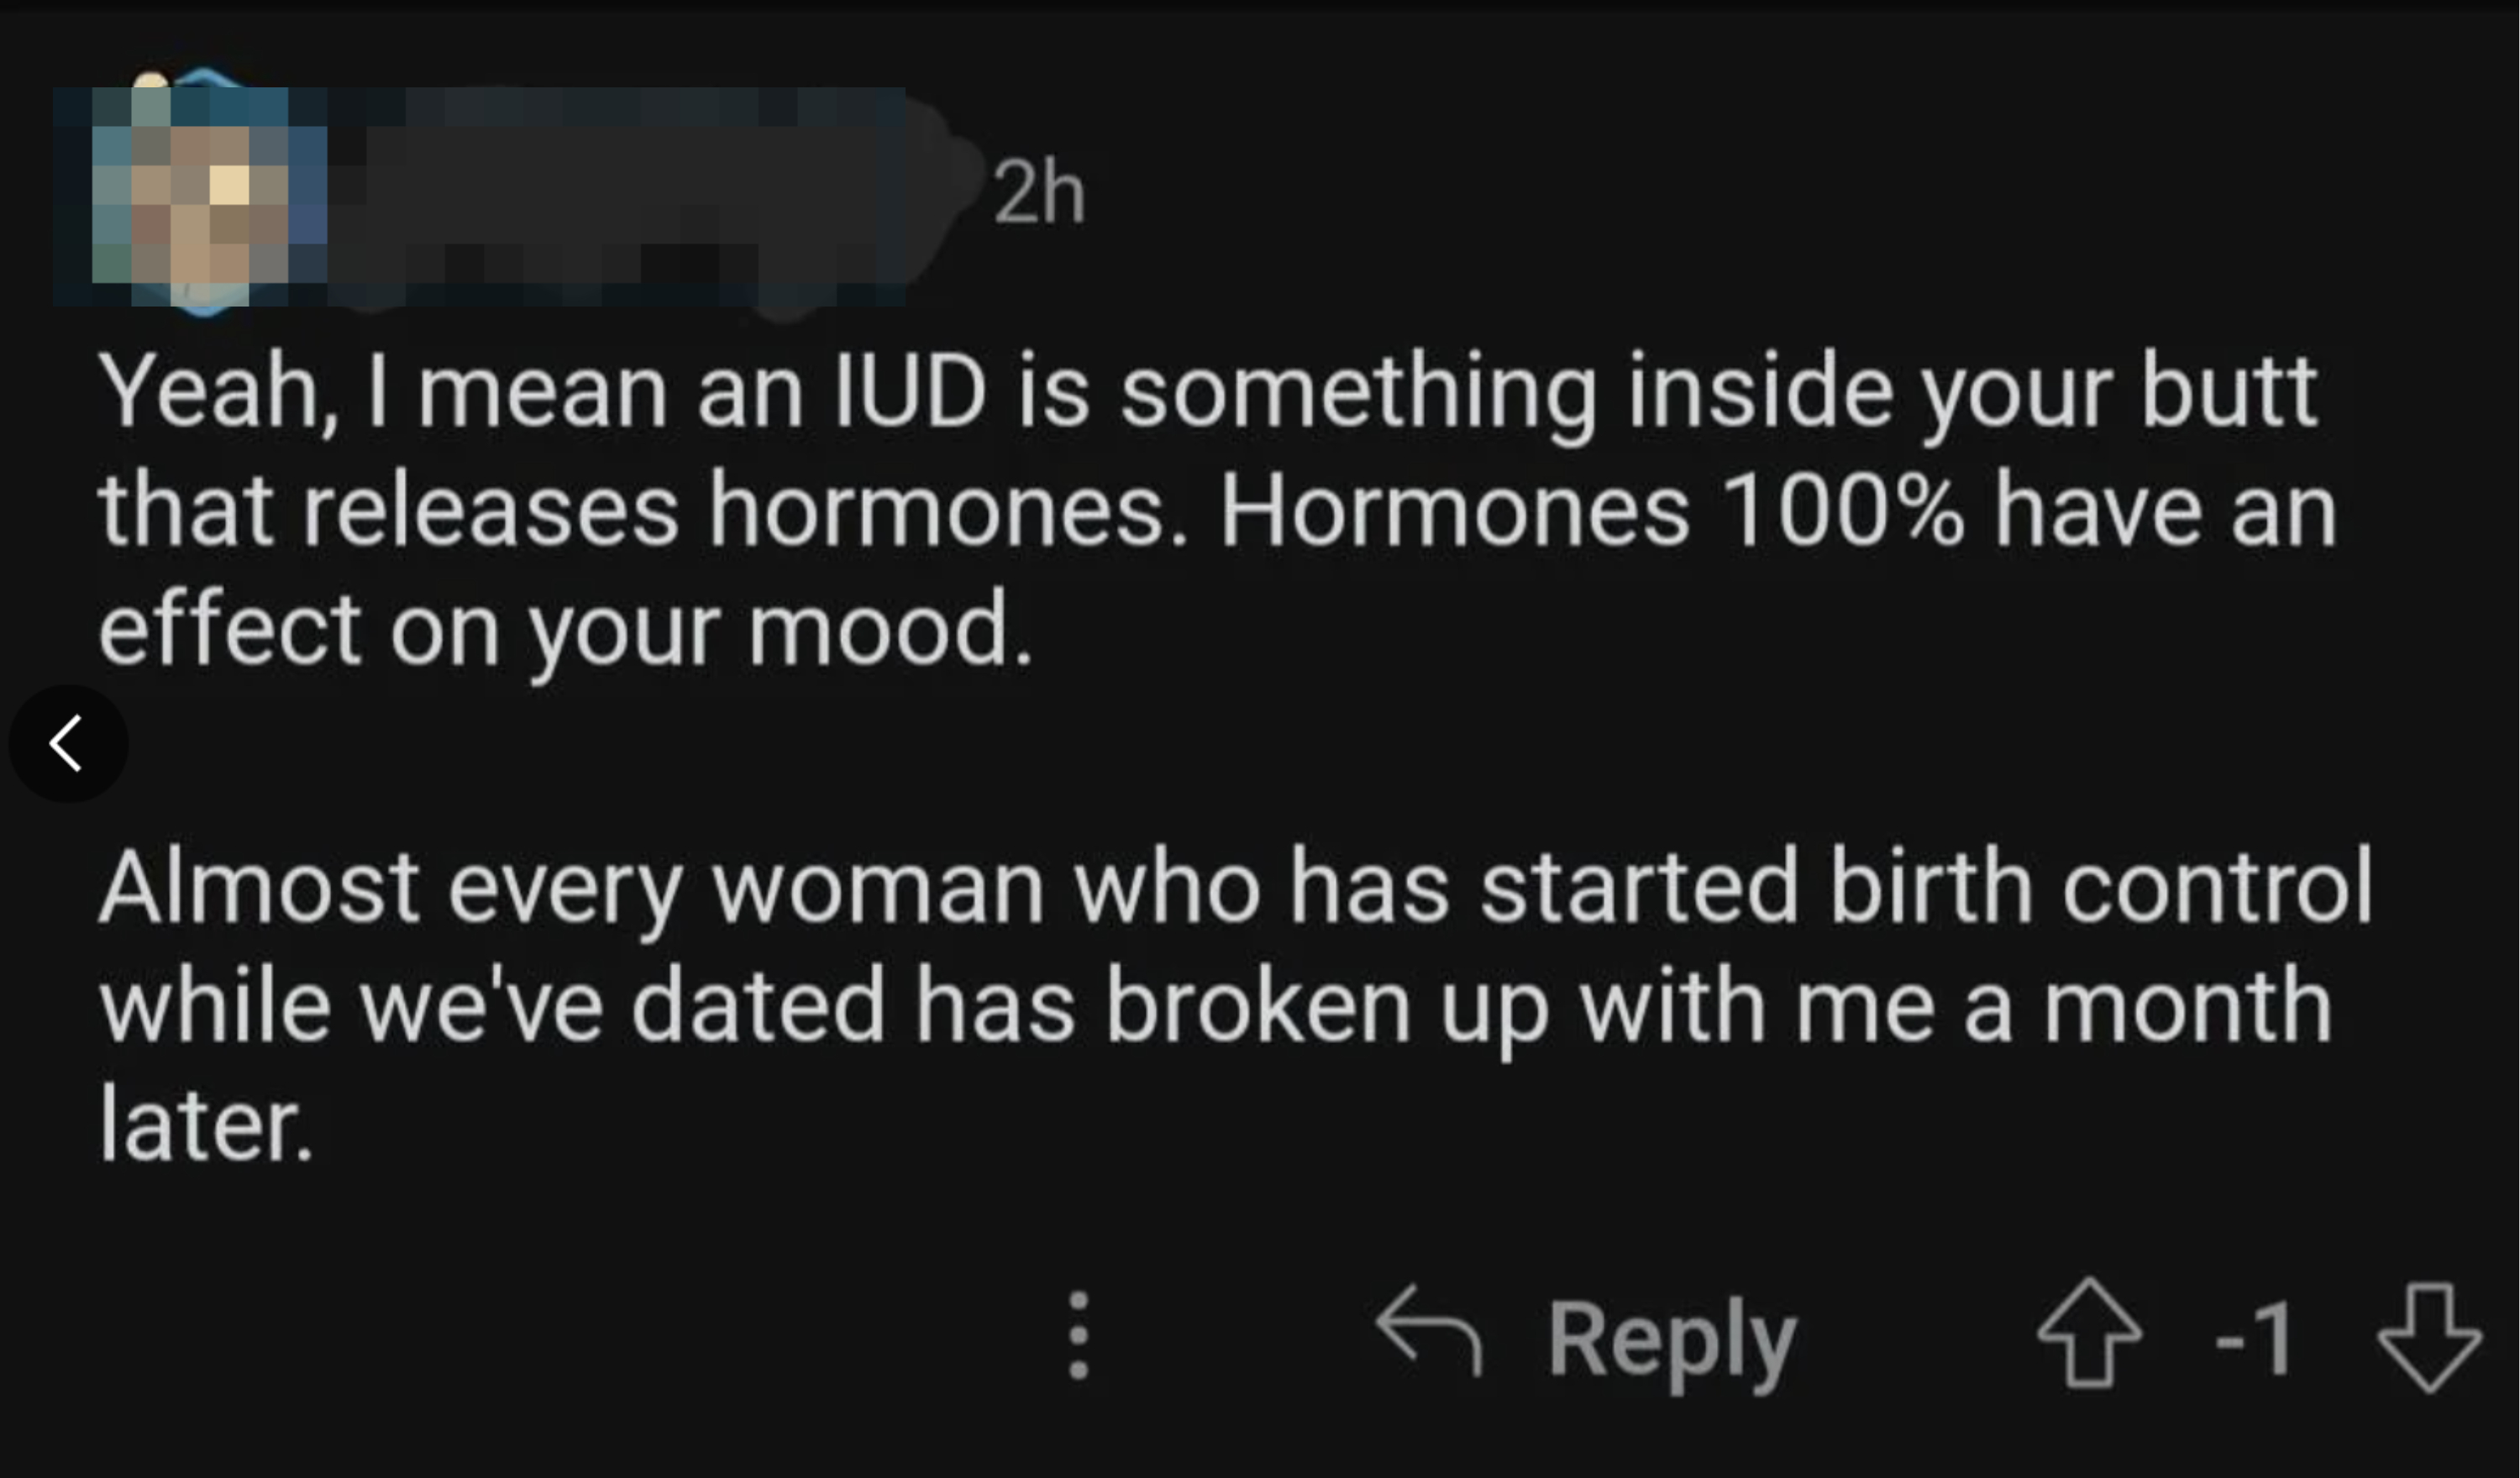 Summary of a screenshot with a comment about personal experiences and misunderstandings regarding IUDs and relationships